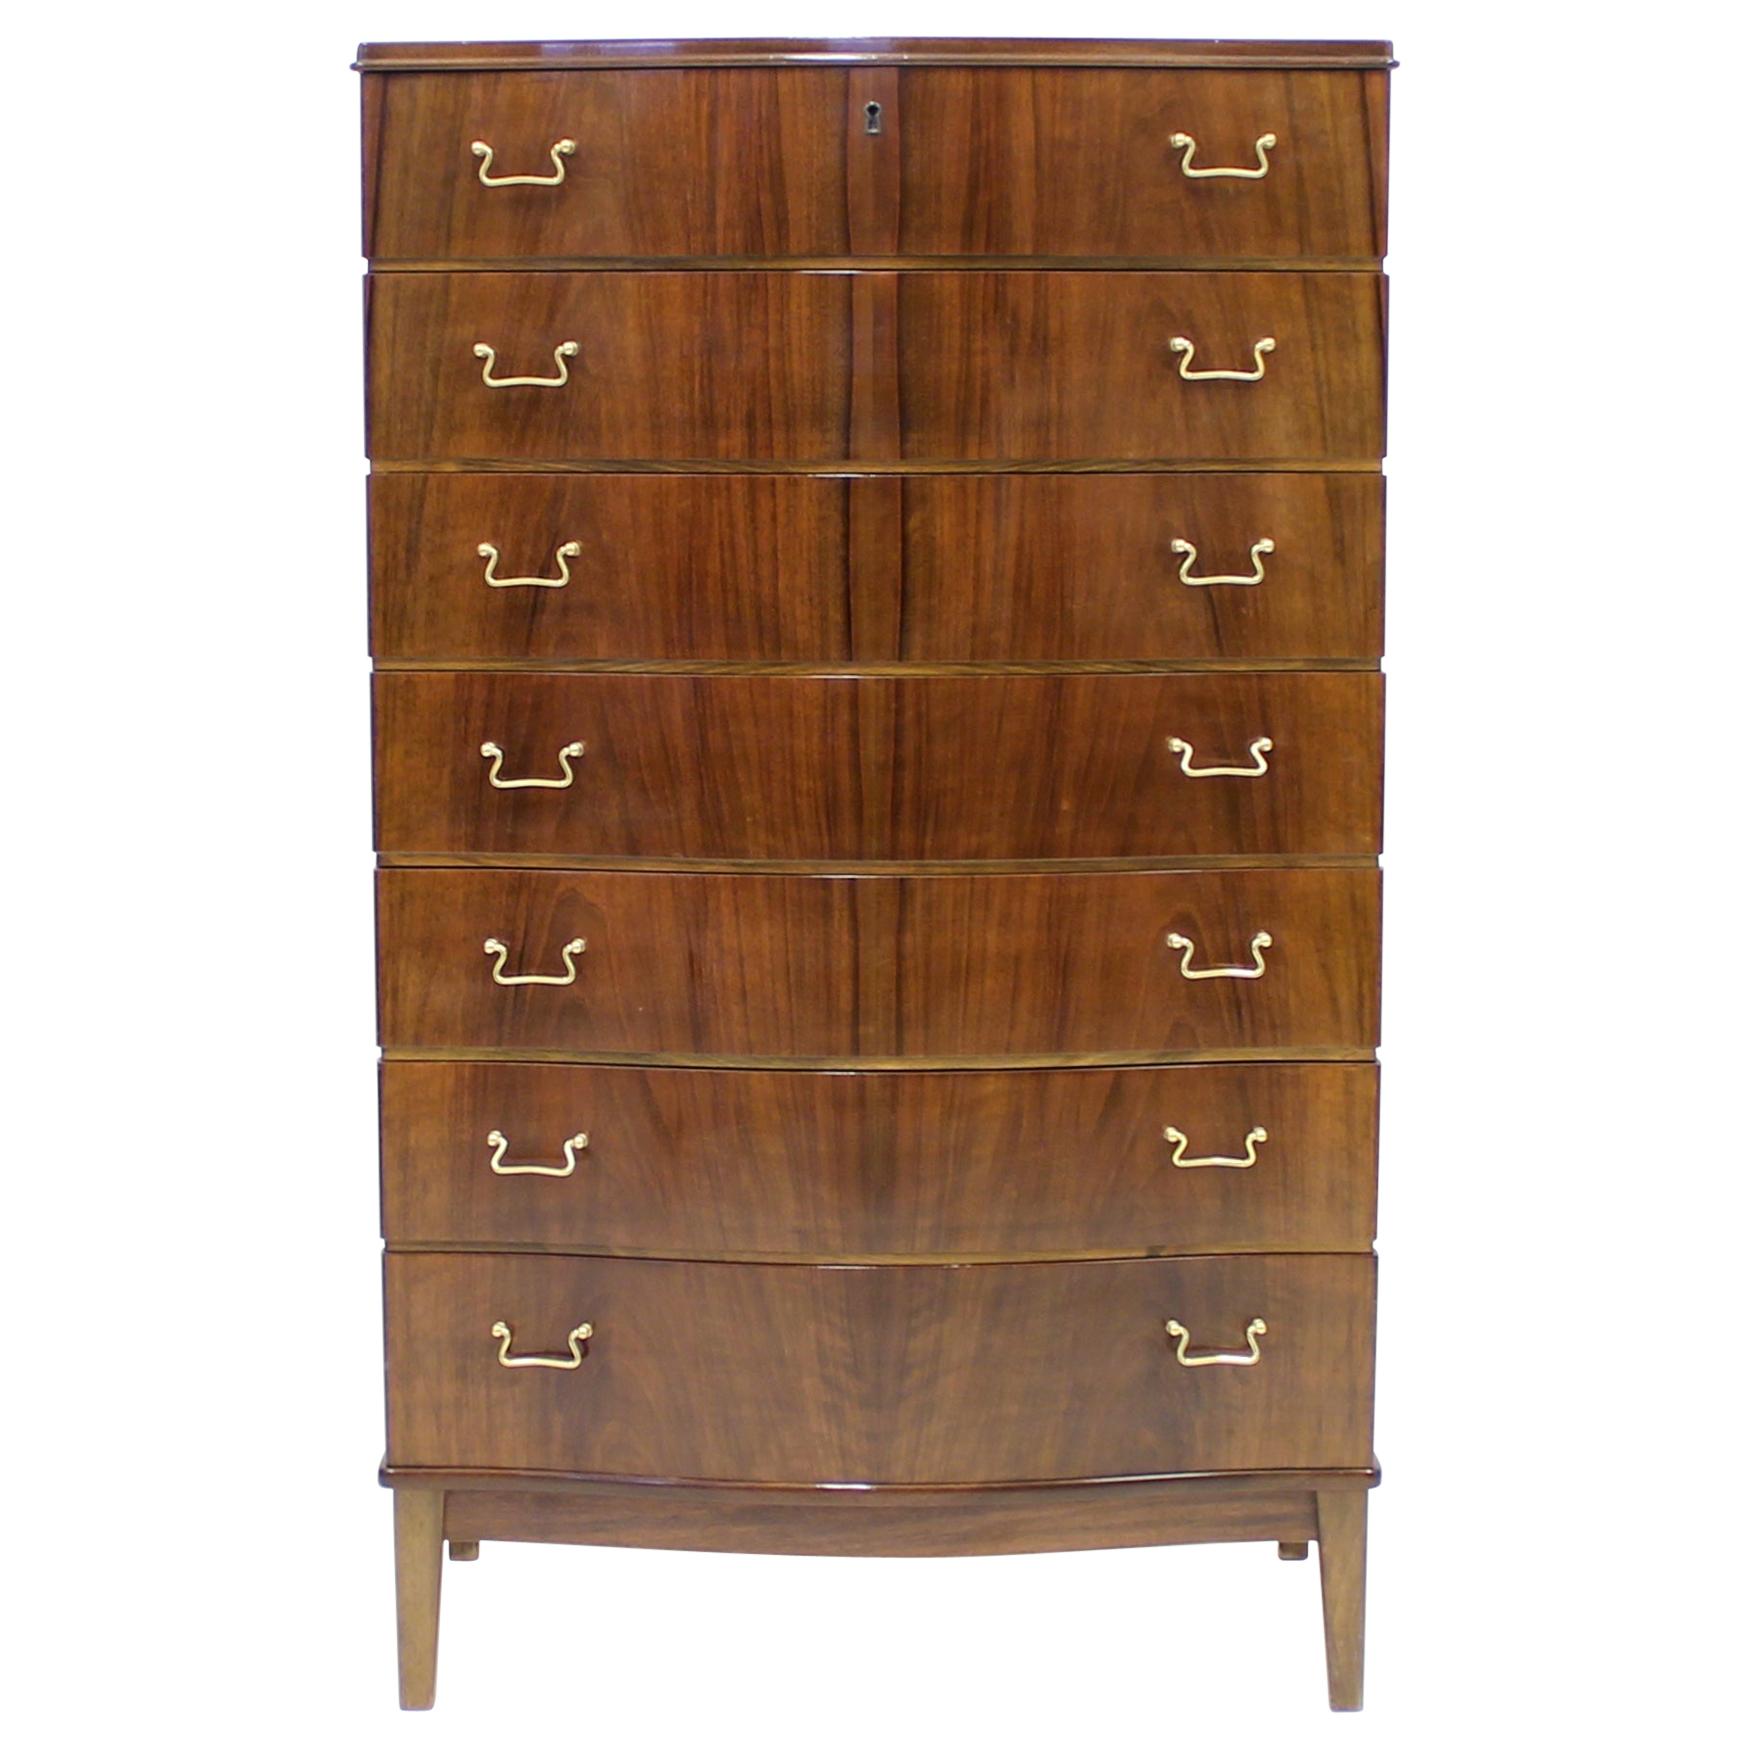 Midcentury Scandinavian Curved Walnut Chest of Drawers, 1950s